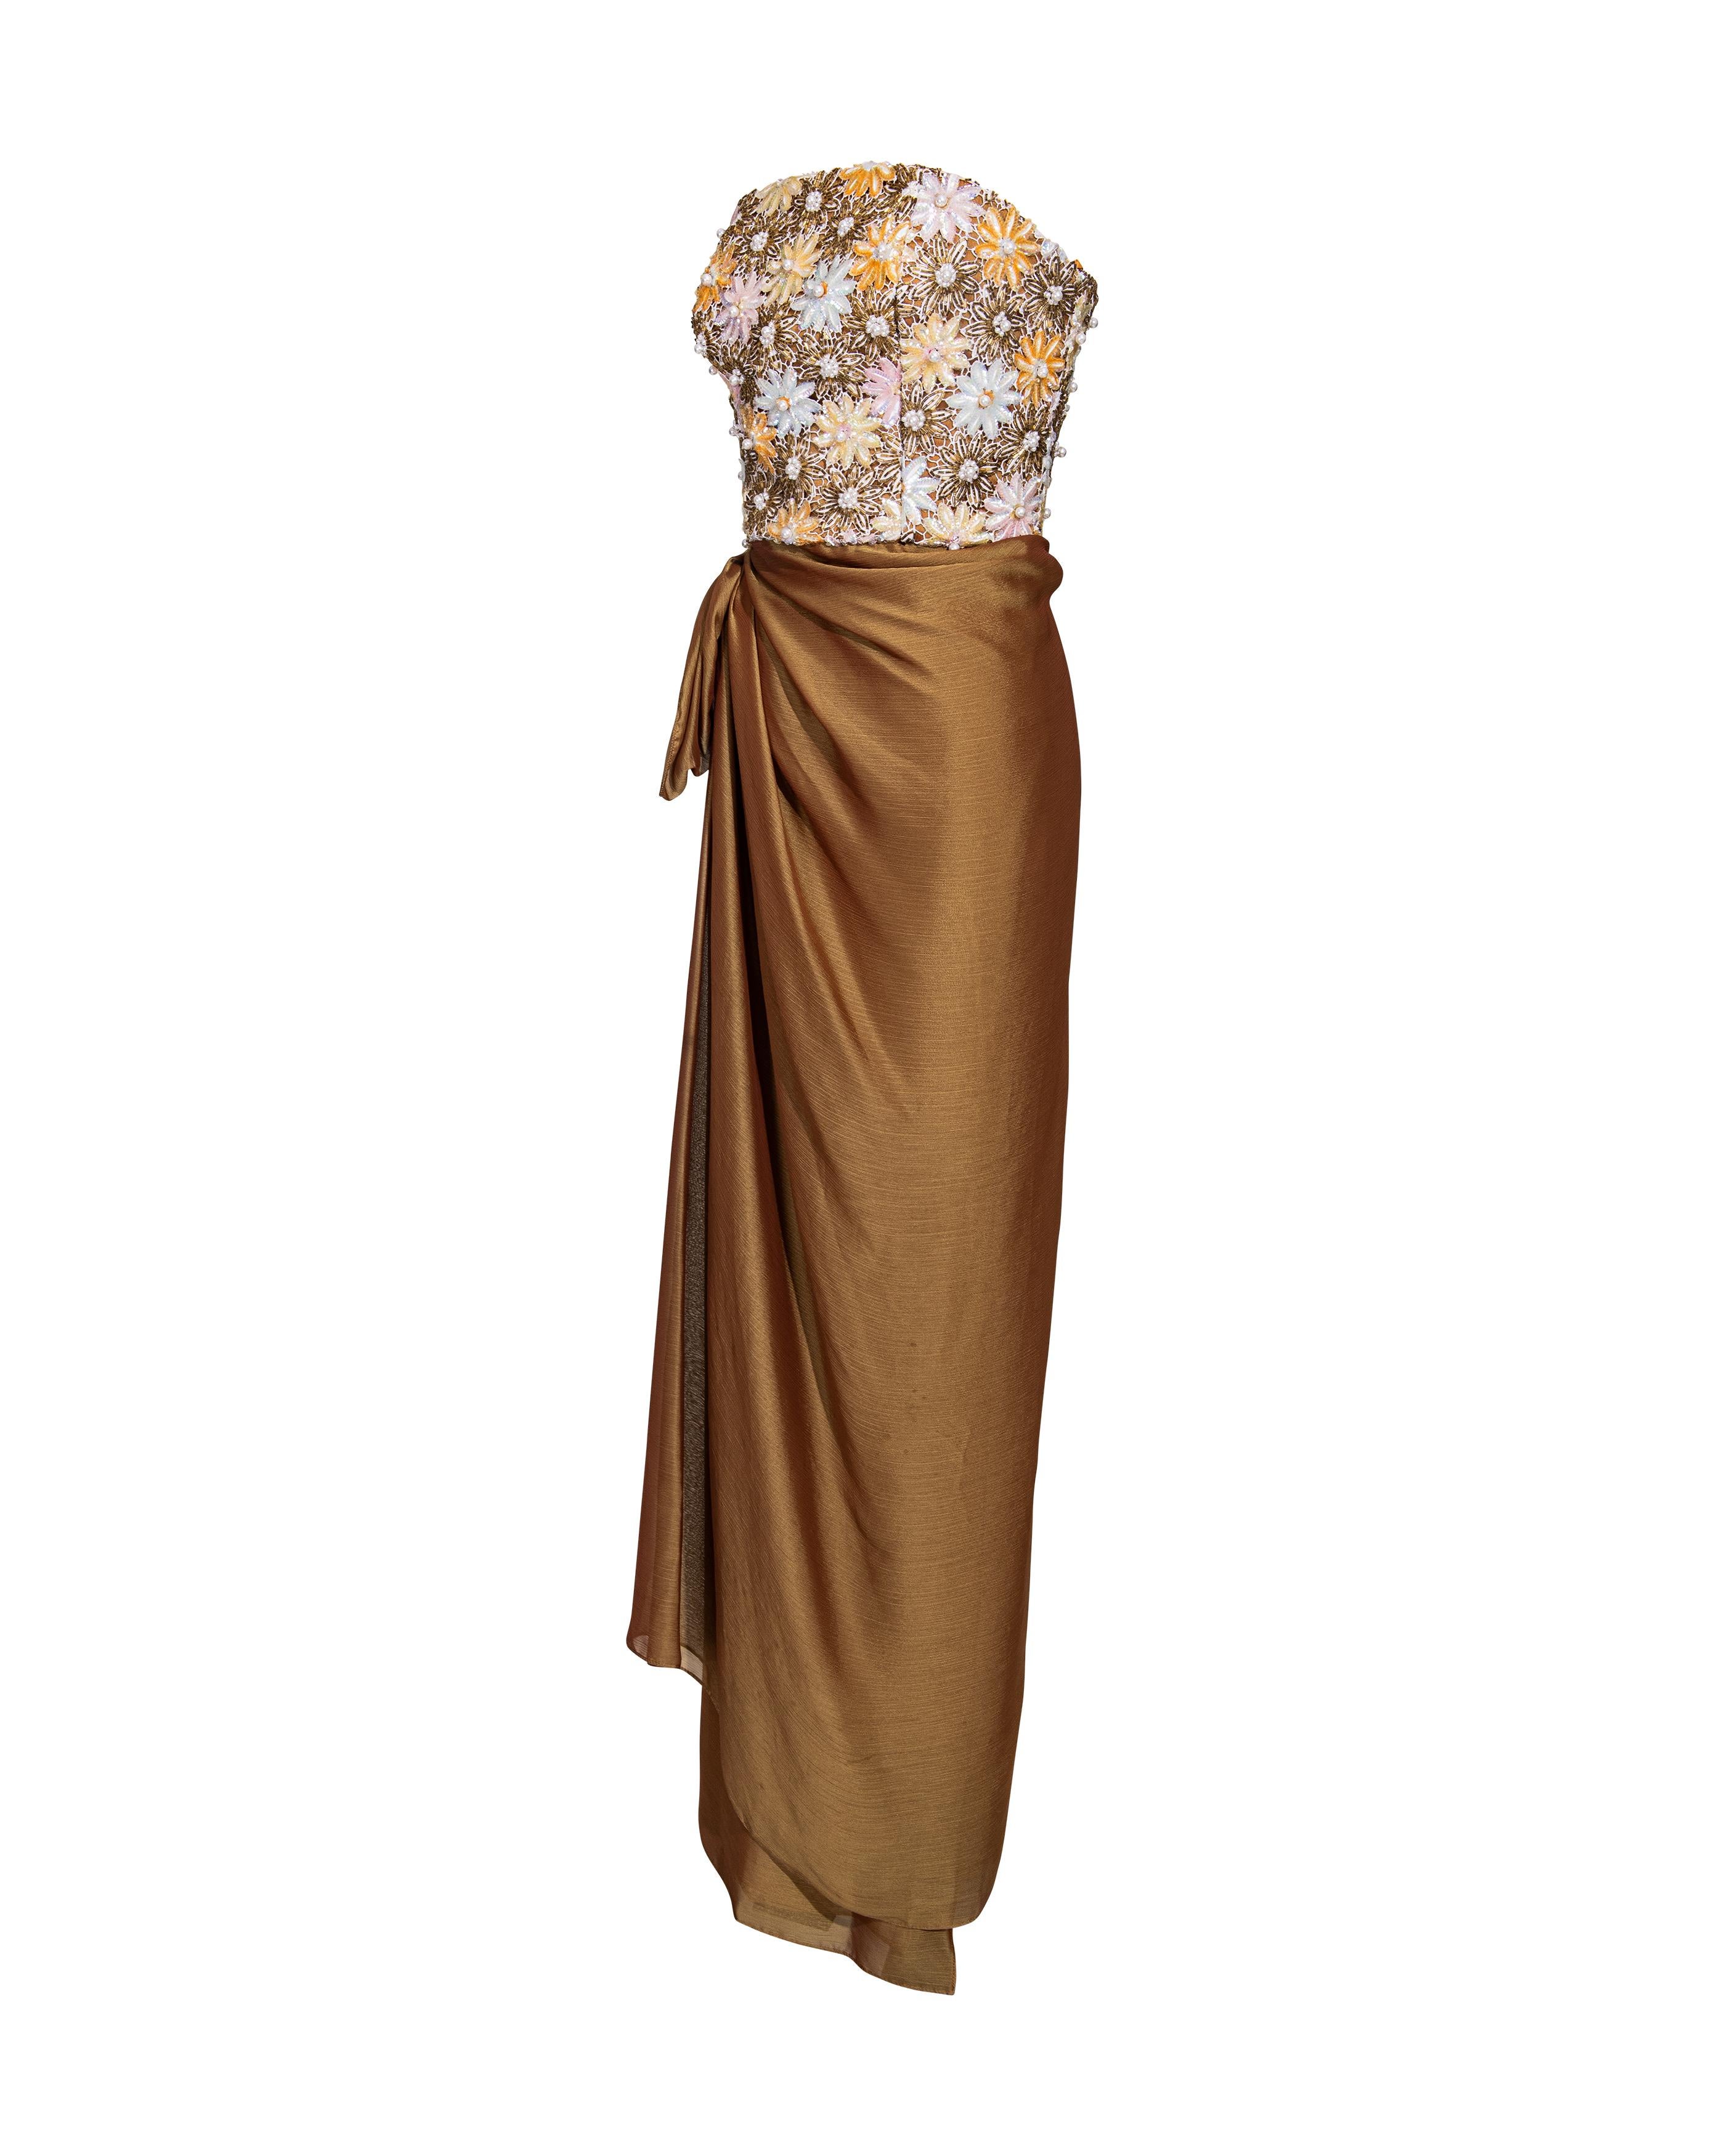 Women's c. 1991 Nina Ricci Embellished Copper Strapless Gown with Stole